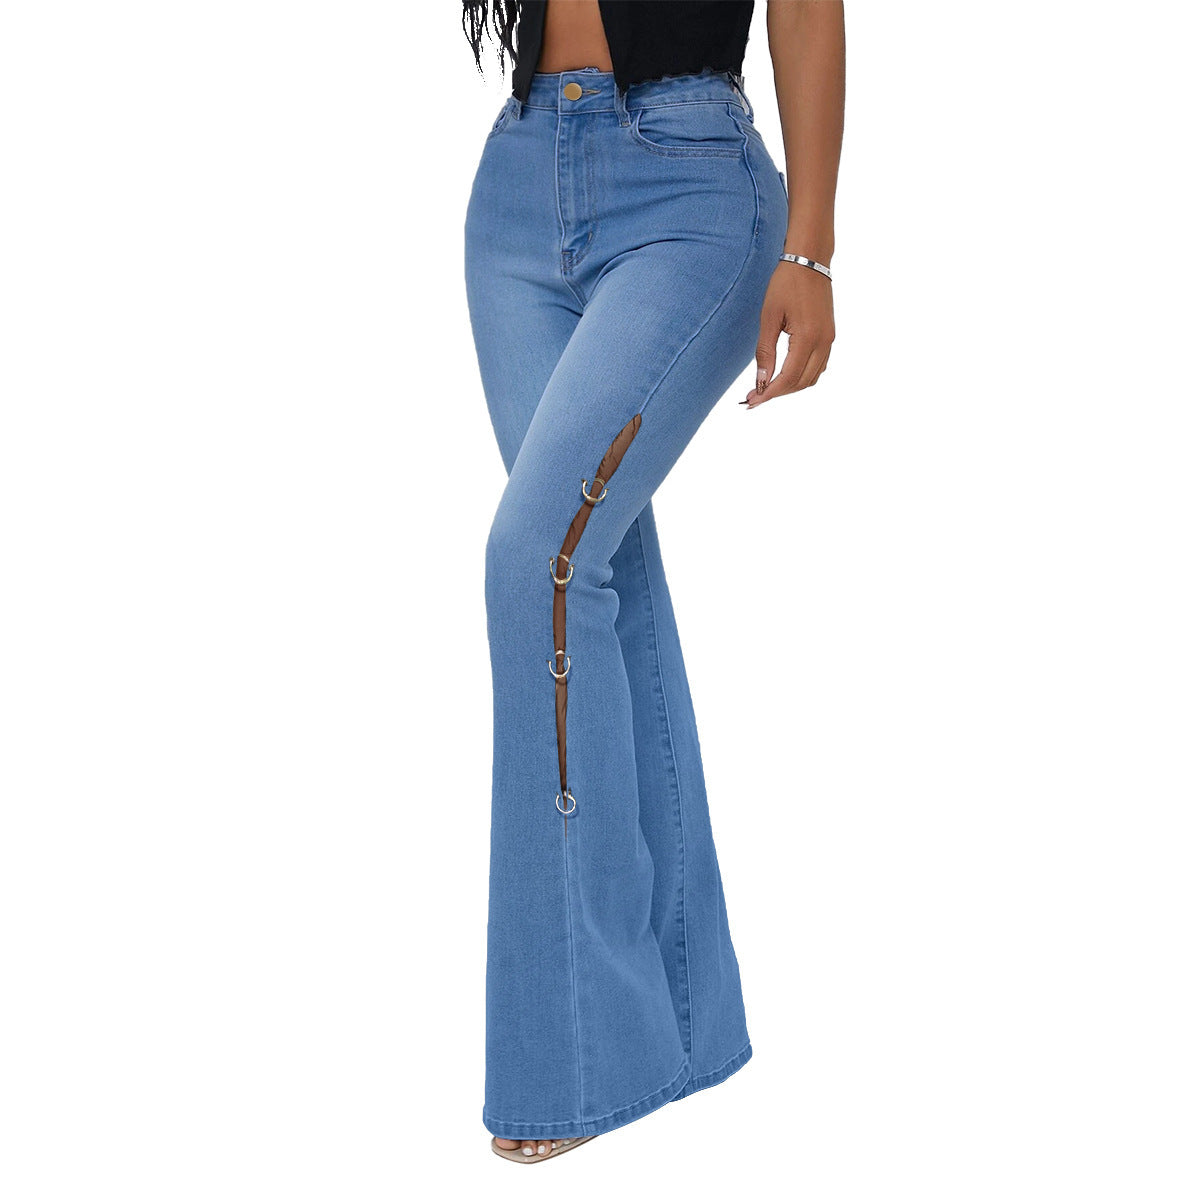 Denim Flared Pants With Metal Decoration